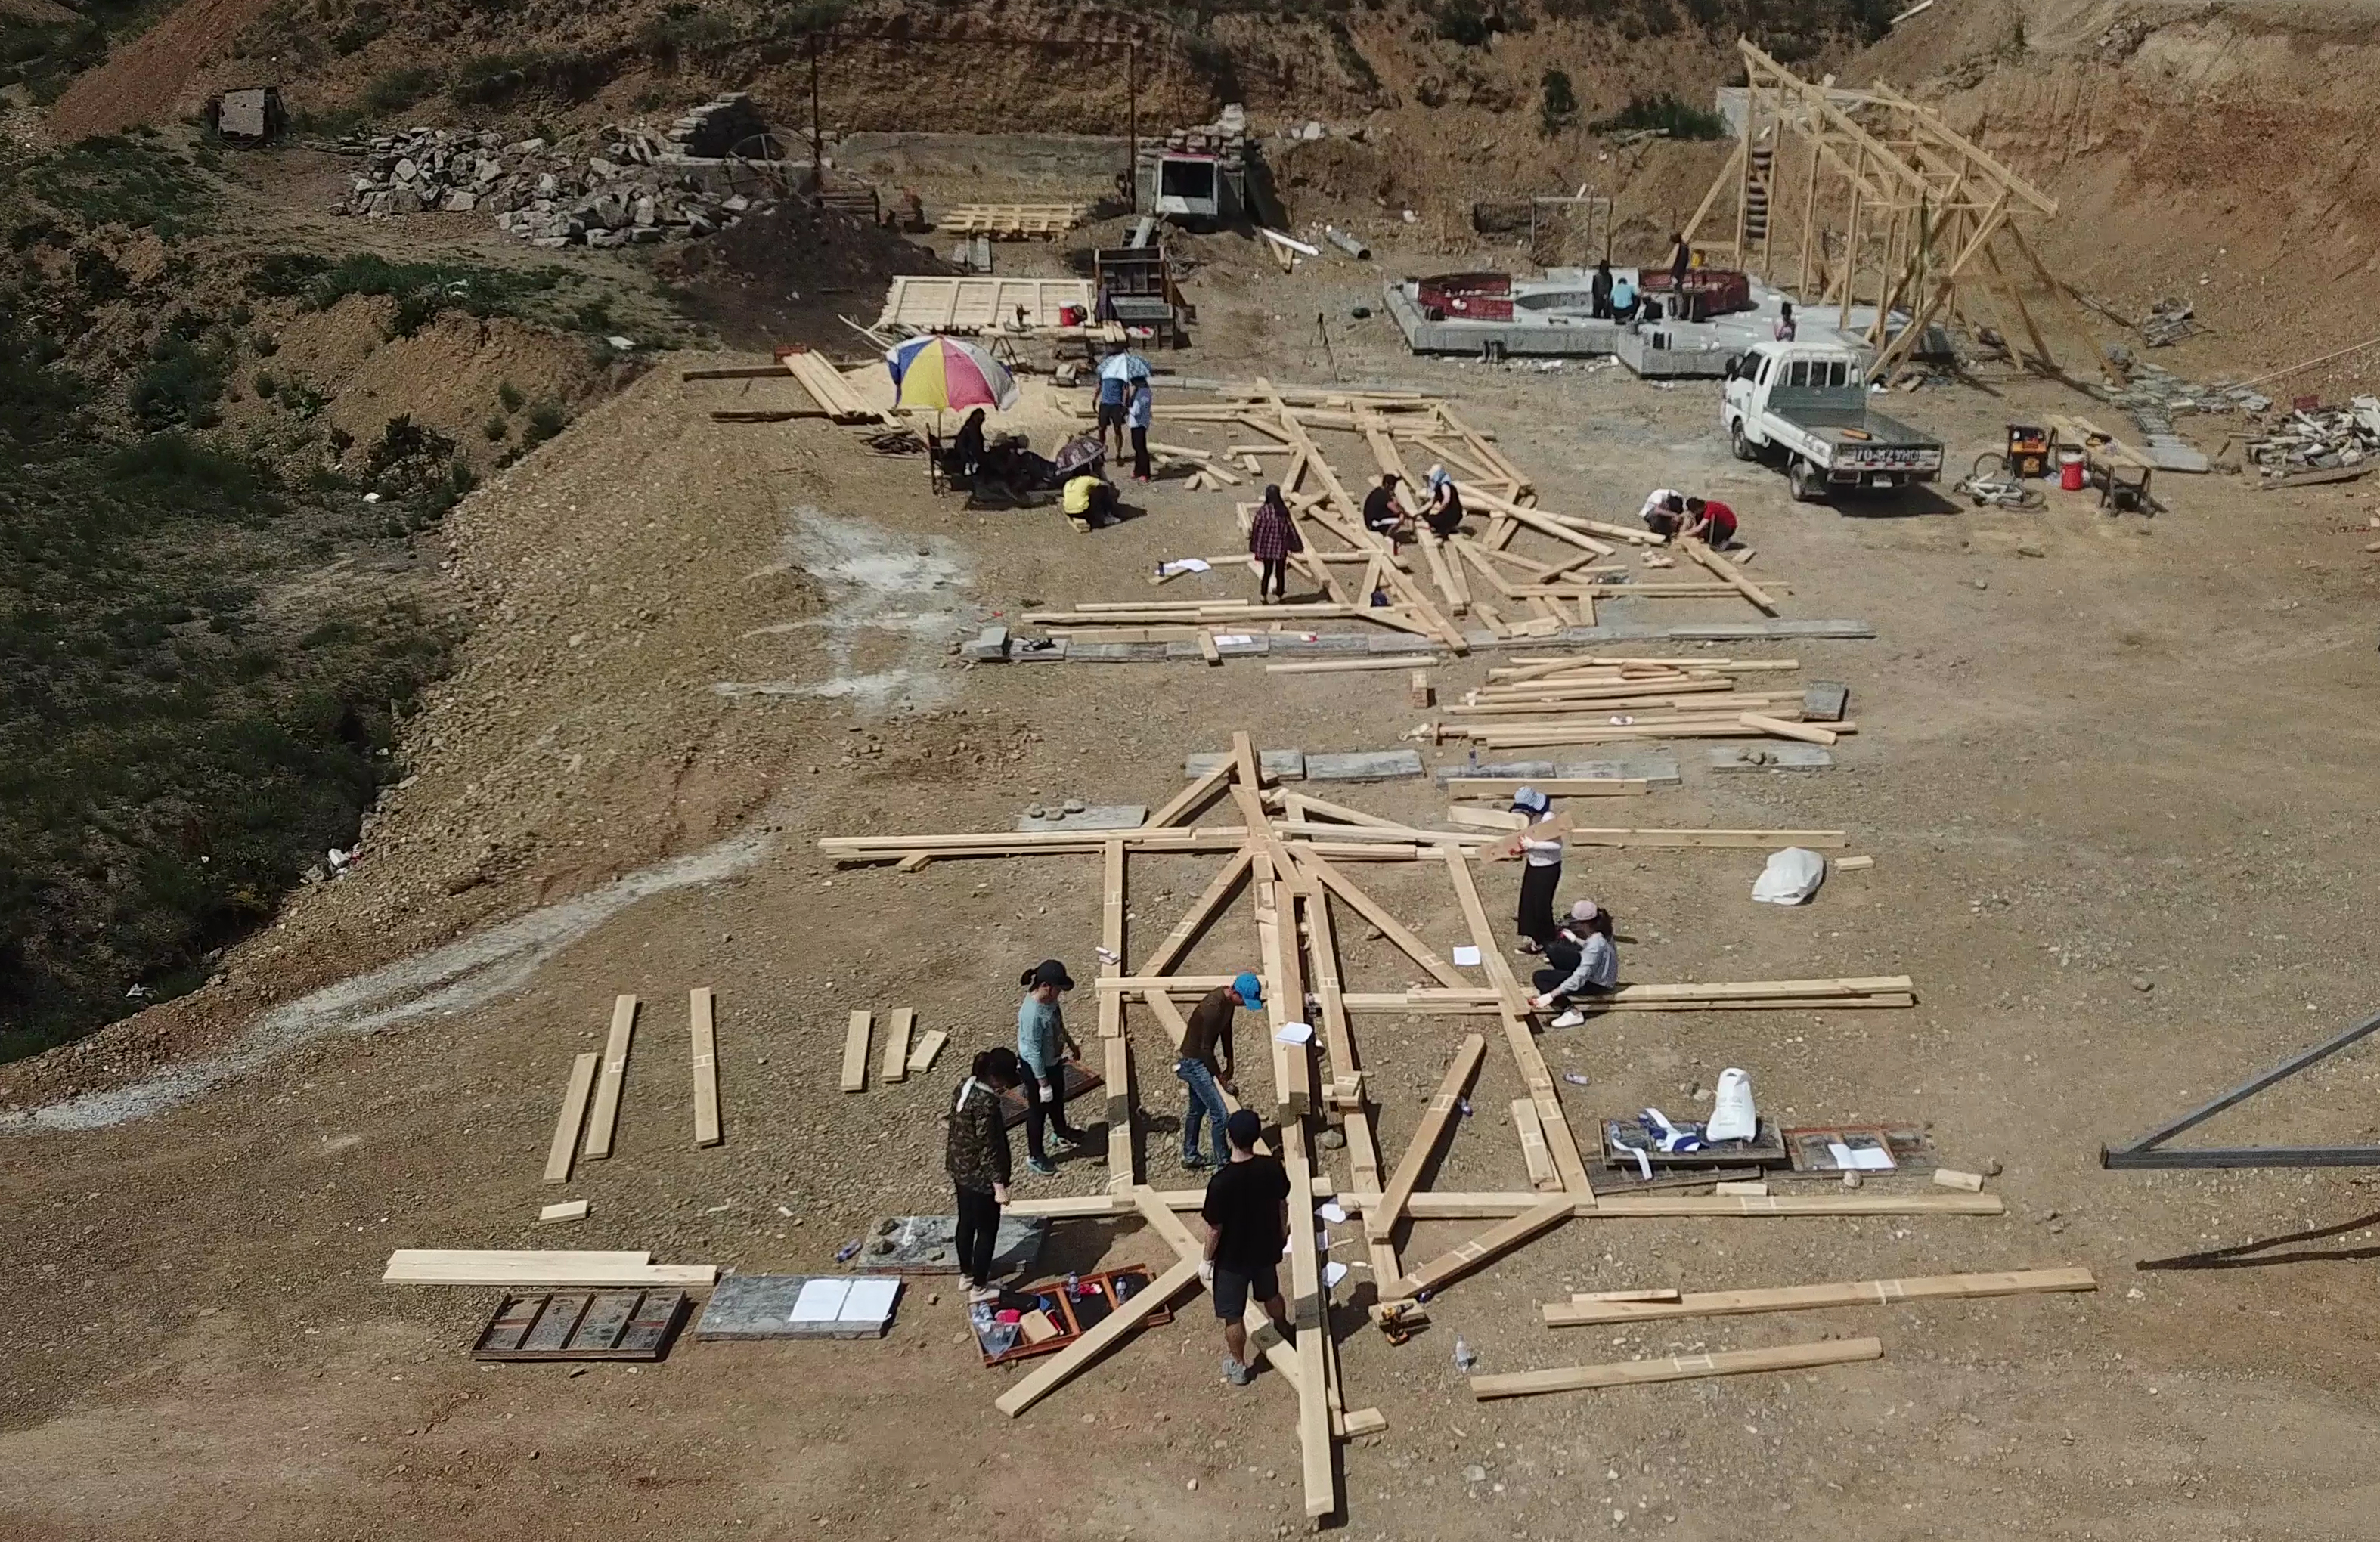 Construction site with wooden beams laid out on a dirt plain. People gathered around discussing the project. 